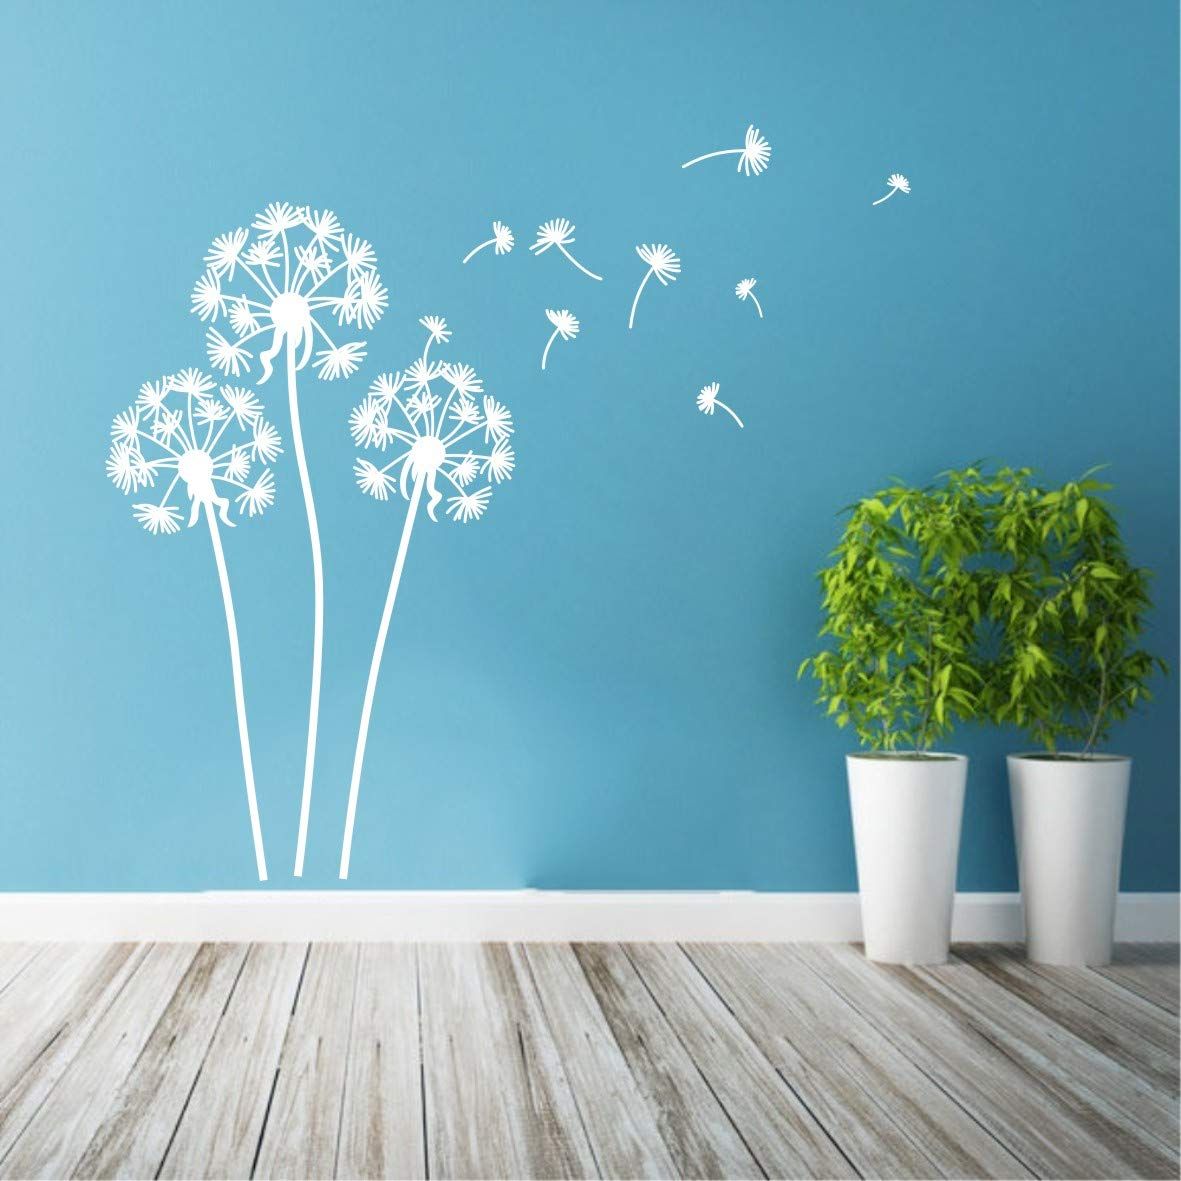 Wall Decal Flying Dandelion Plant Vinyl Wall Stickers Home Living Room Decor  Kids Nursery Room Removable Throughout Flying Dandelion Wall Art (View 15 of 15)